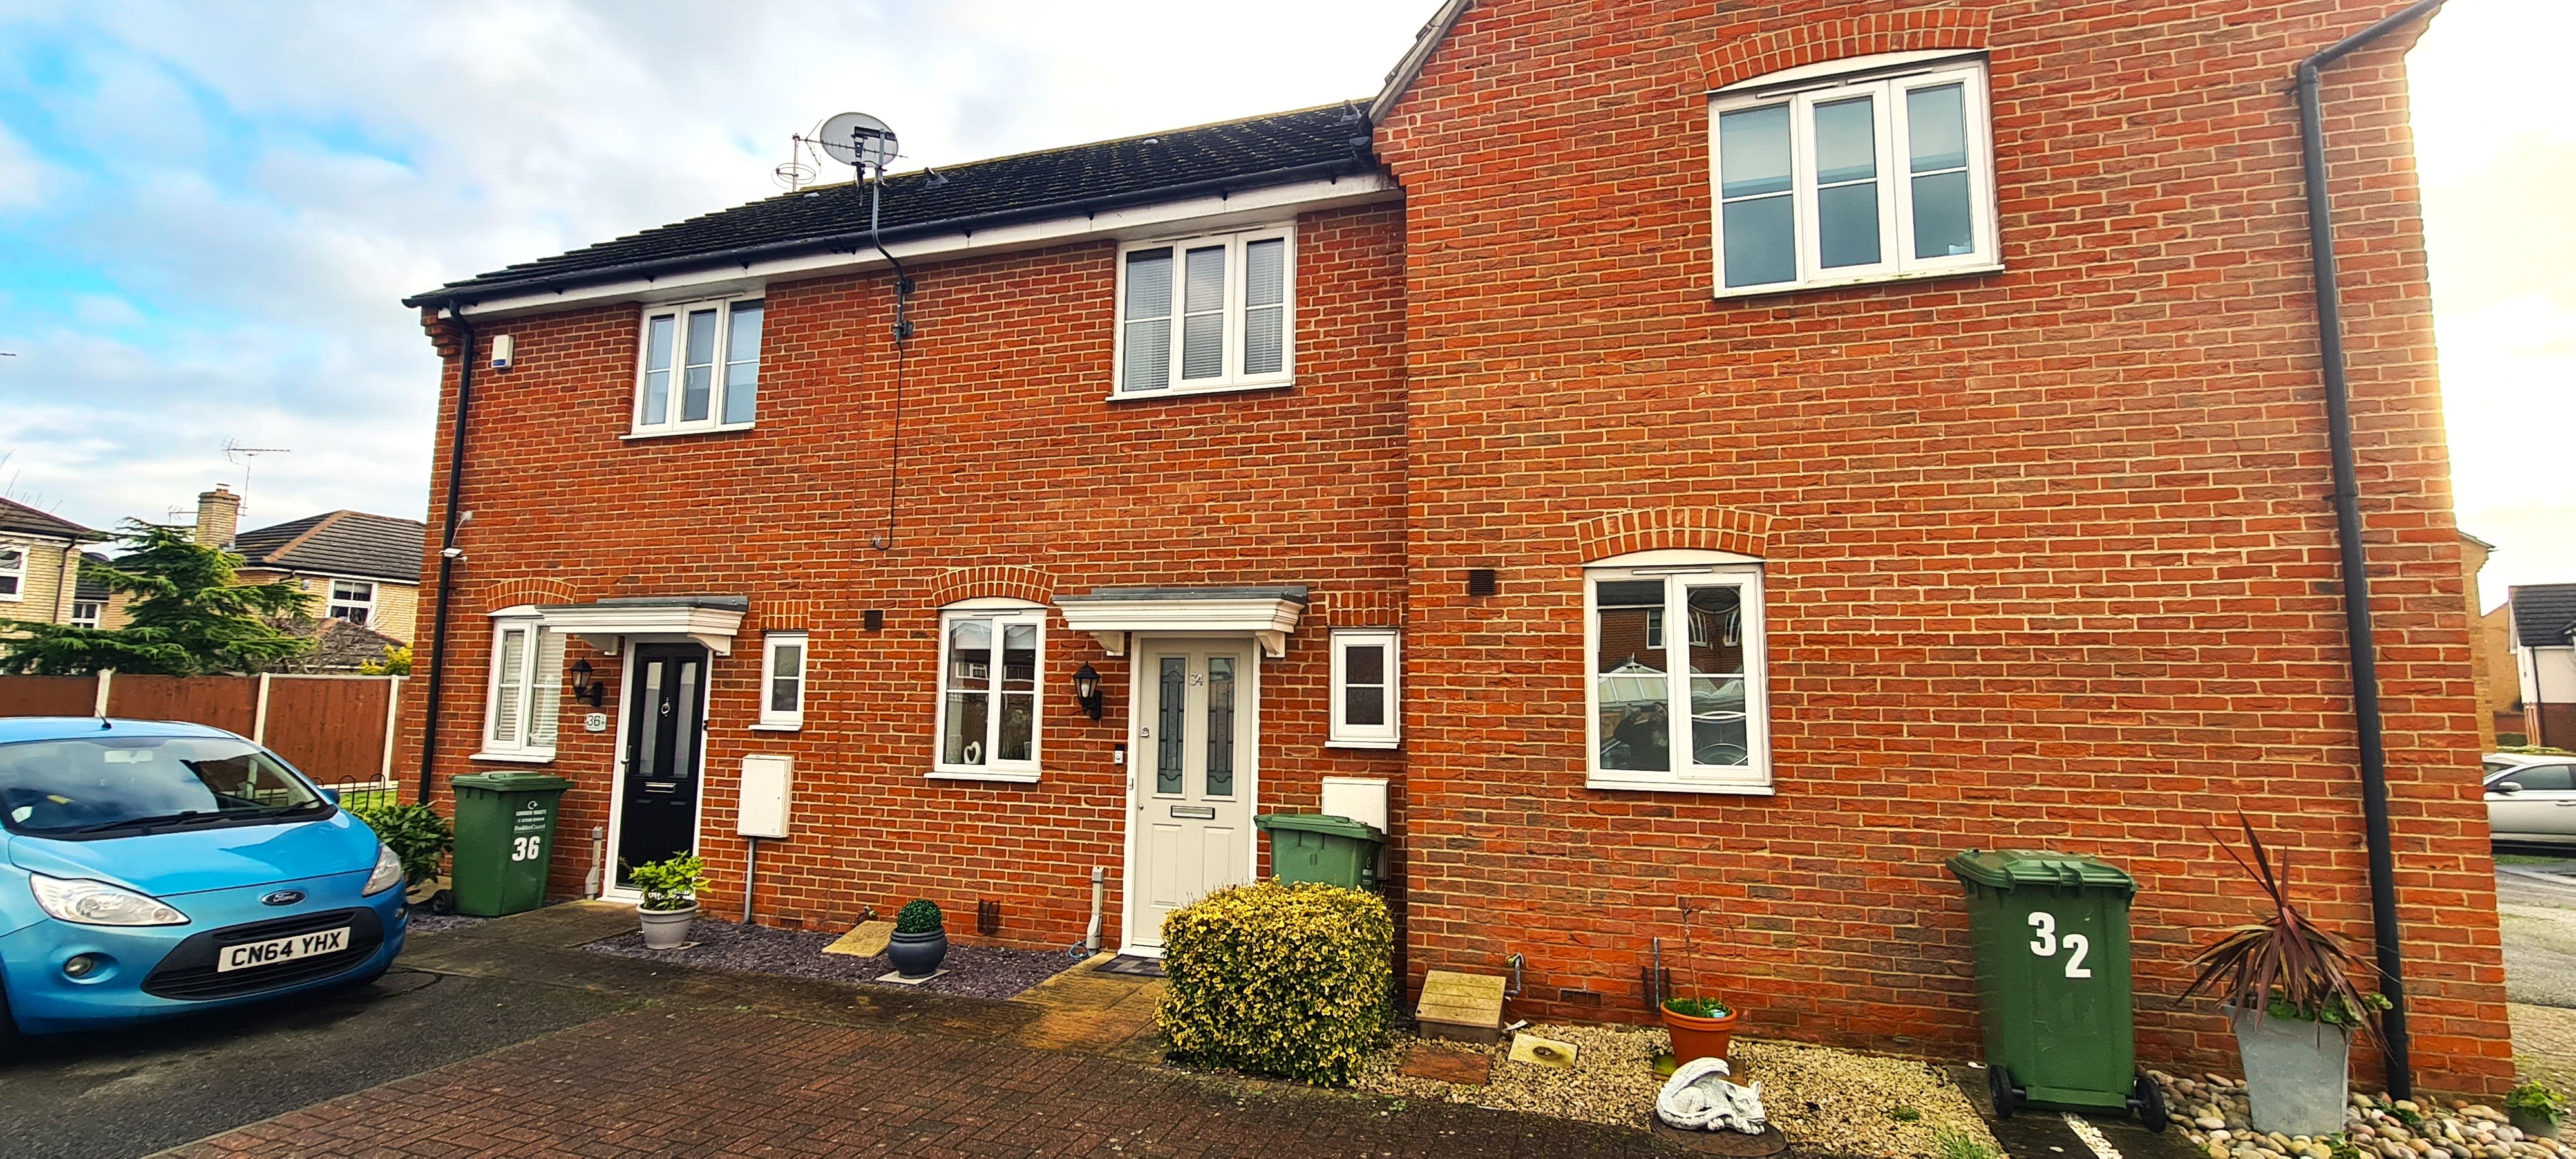 2 bed  to rent in Barbour Green, Wickford, SS12